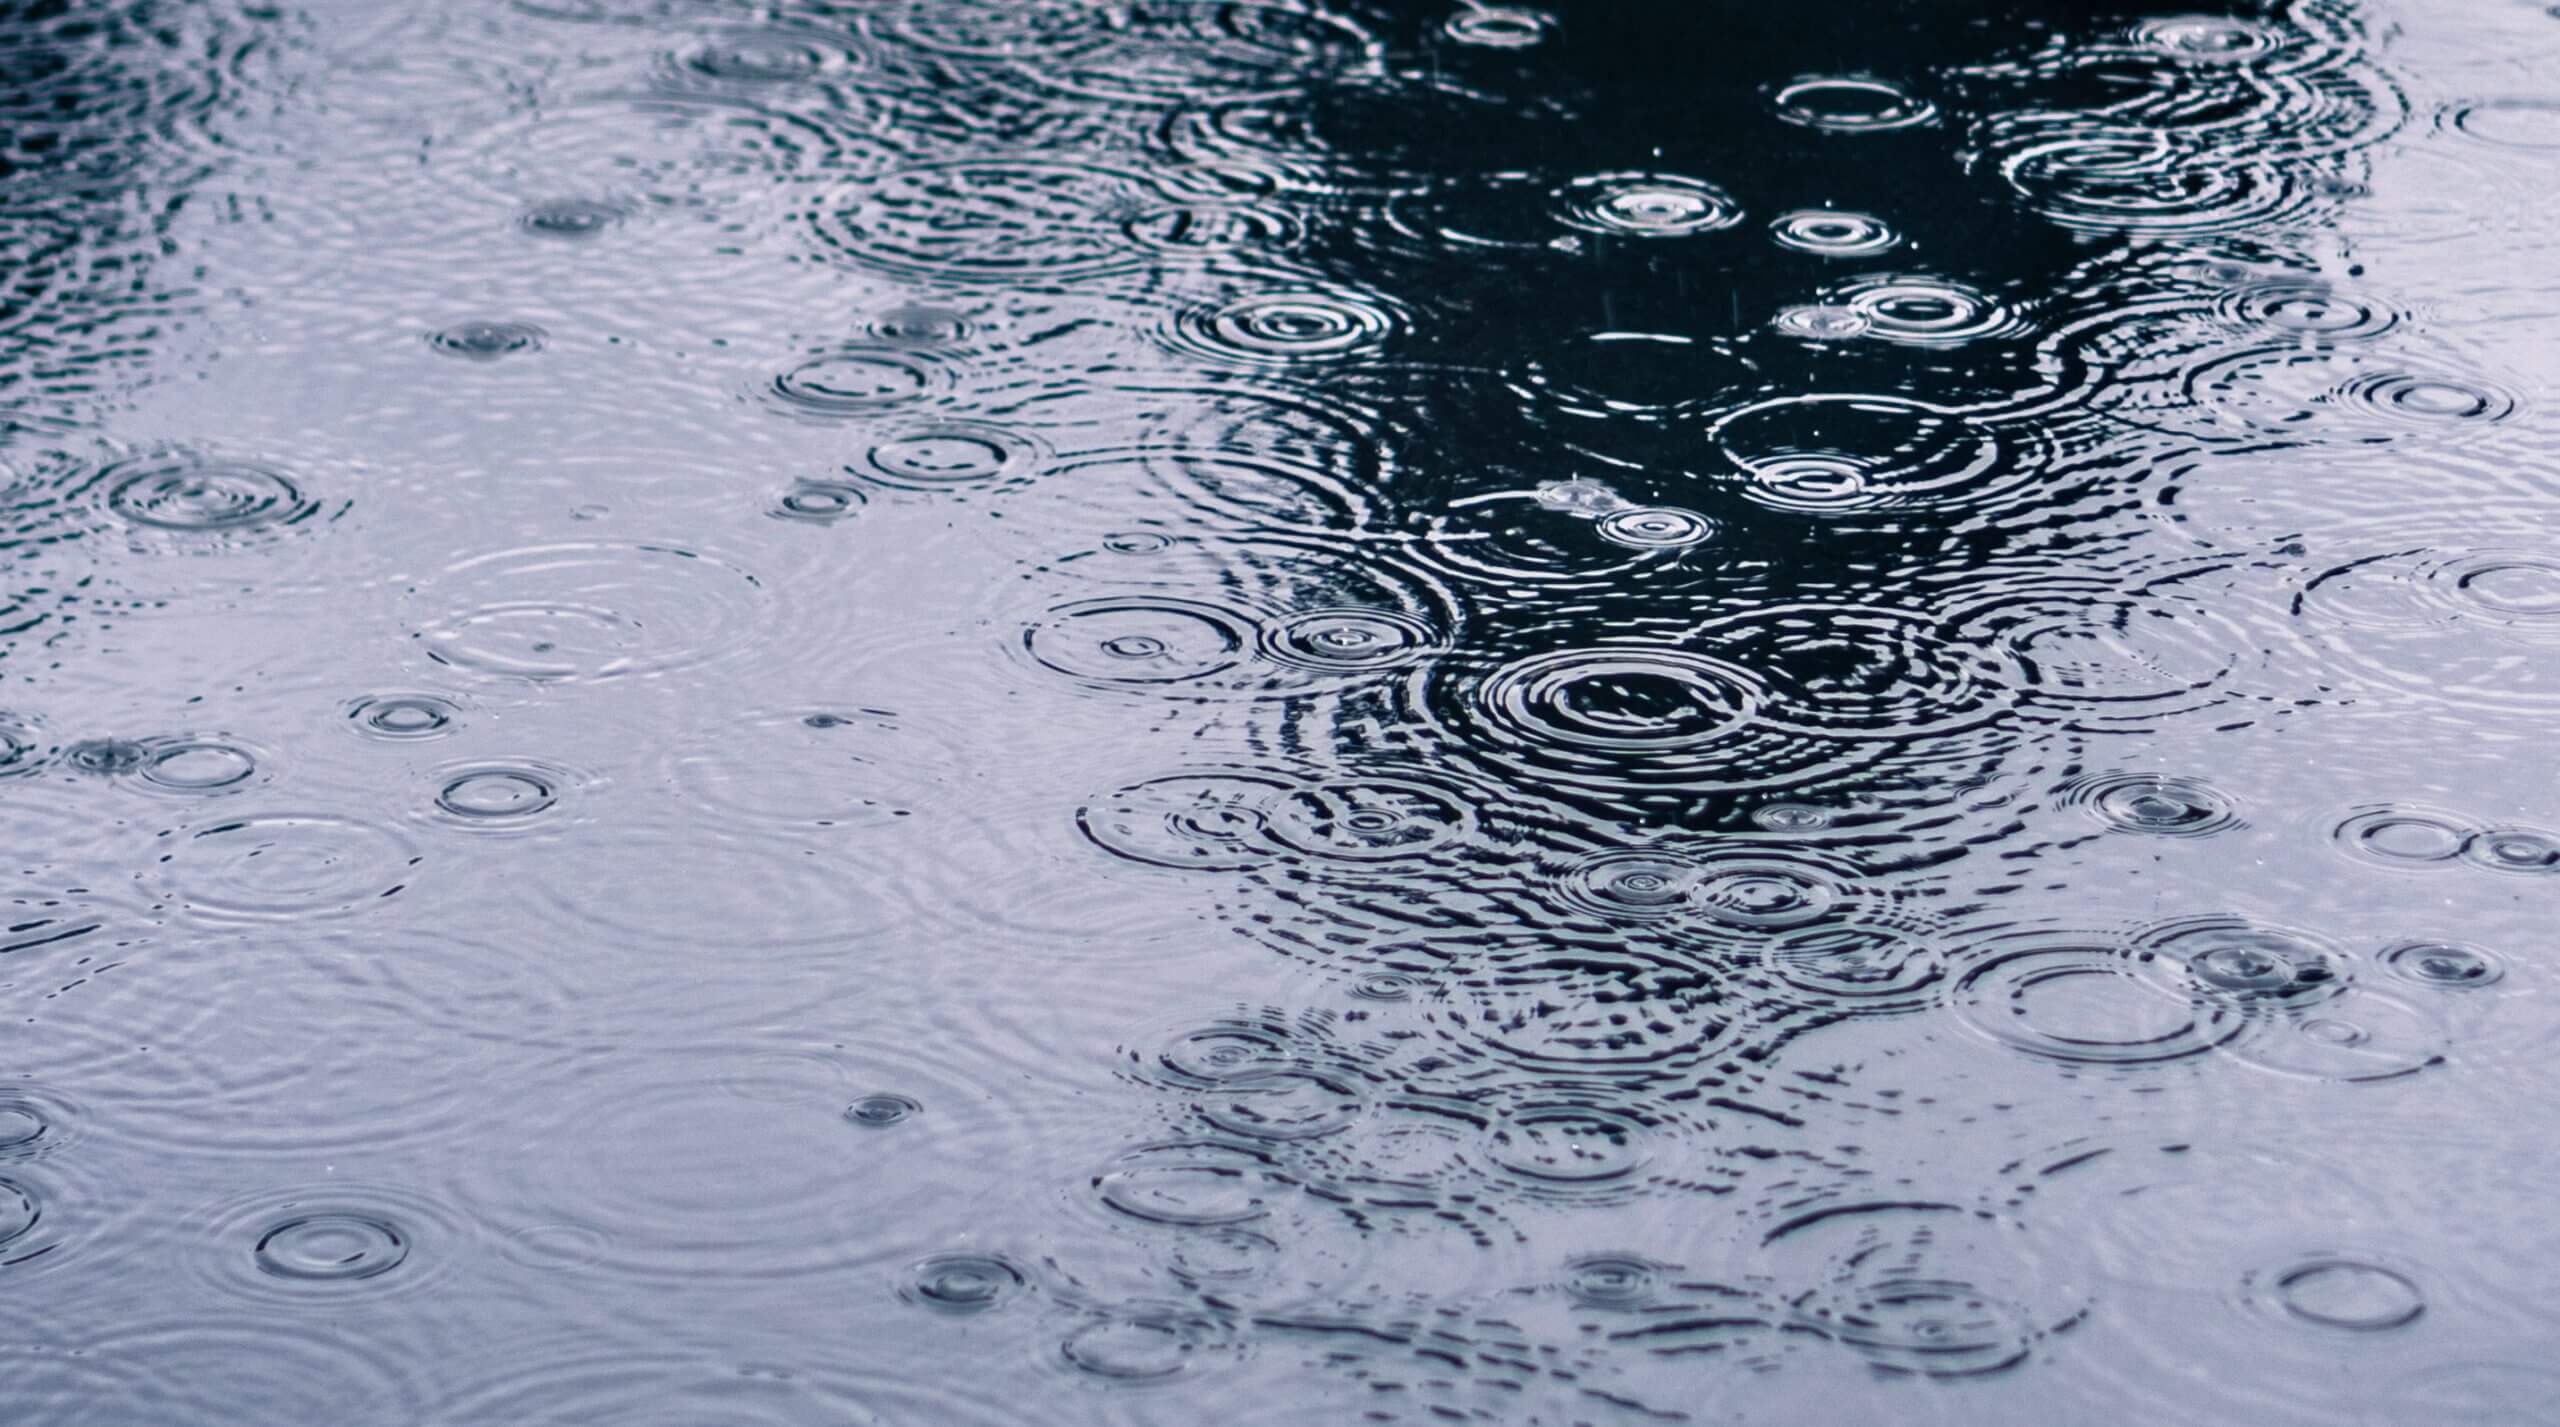 Rain drops rippling in a puddle on a dark, rainy day